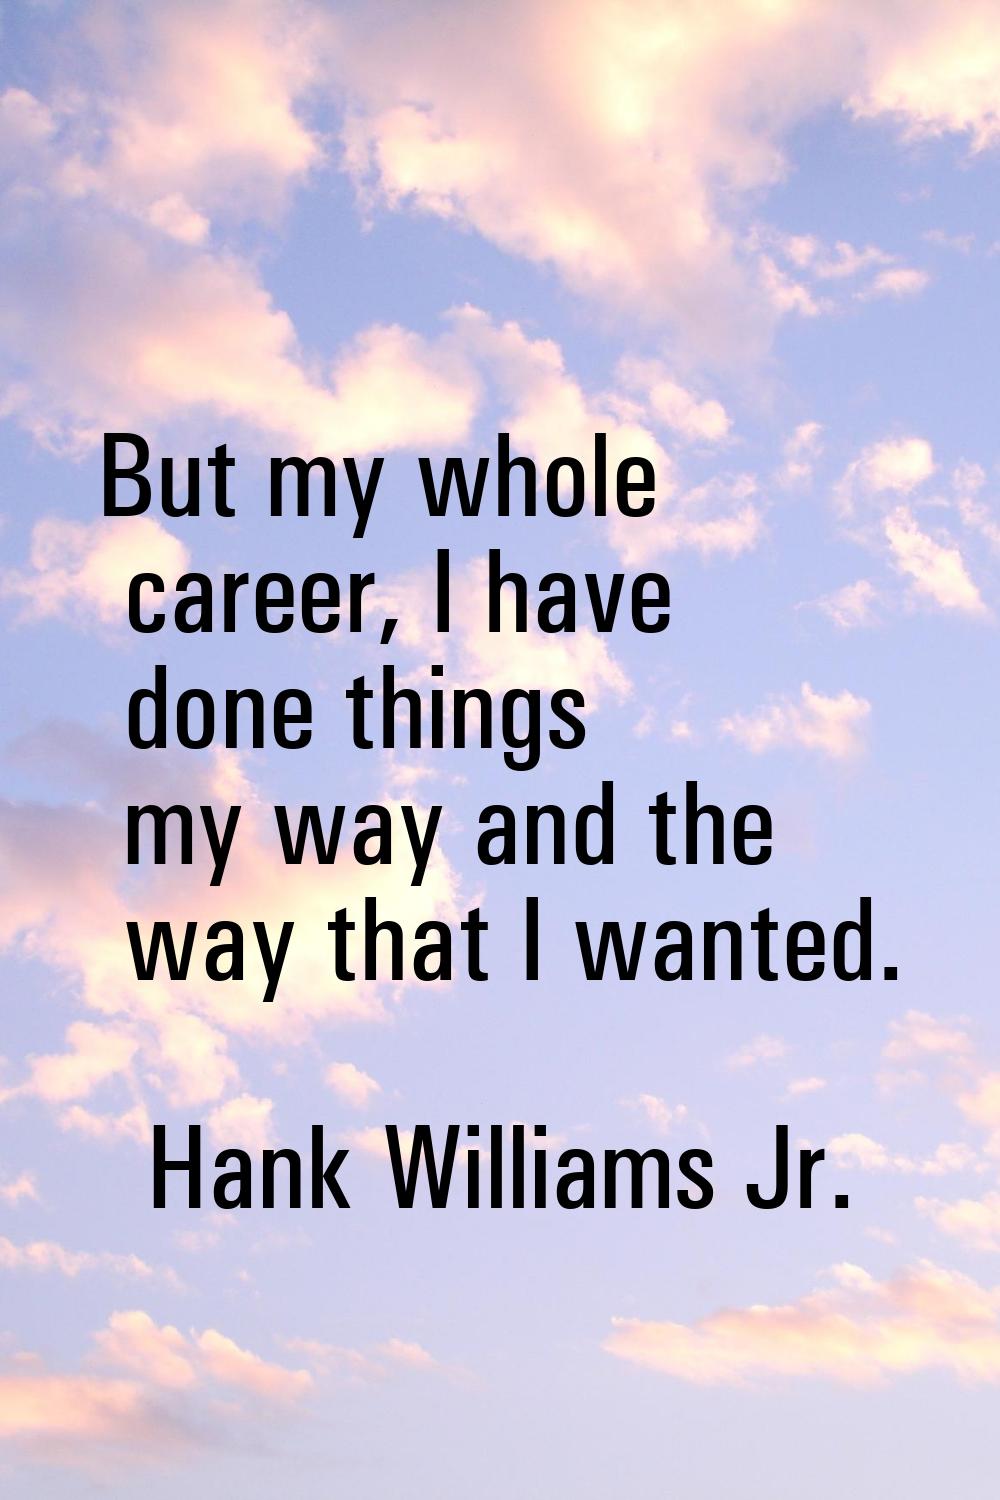 But my whole career, I have done things my way and the way that I wanted.